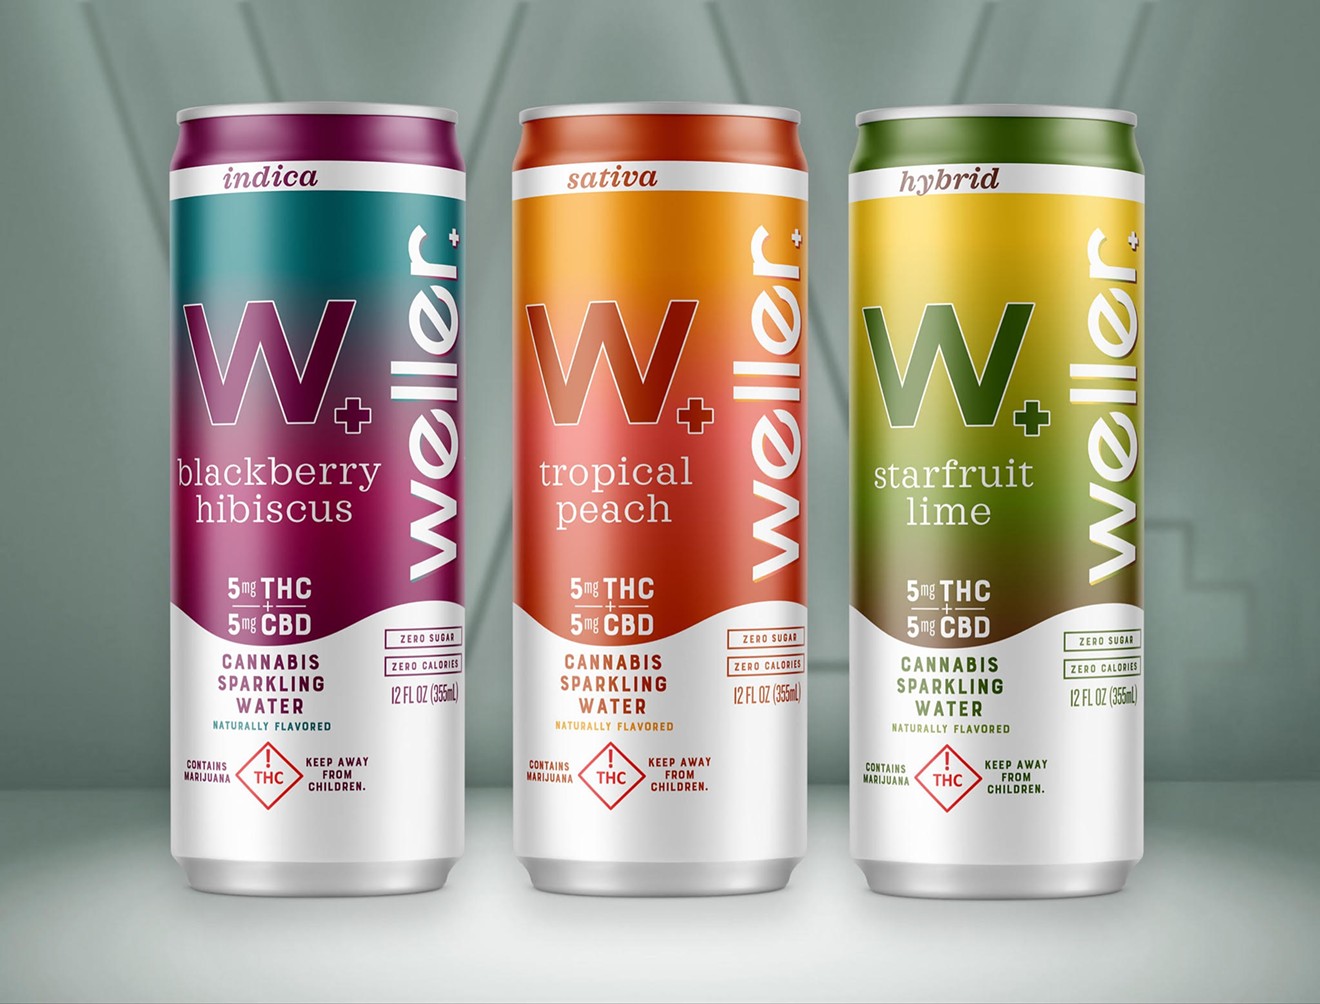 Weller's THC seltzers are made with cannabis-derived terpenes, according to the company.